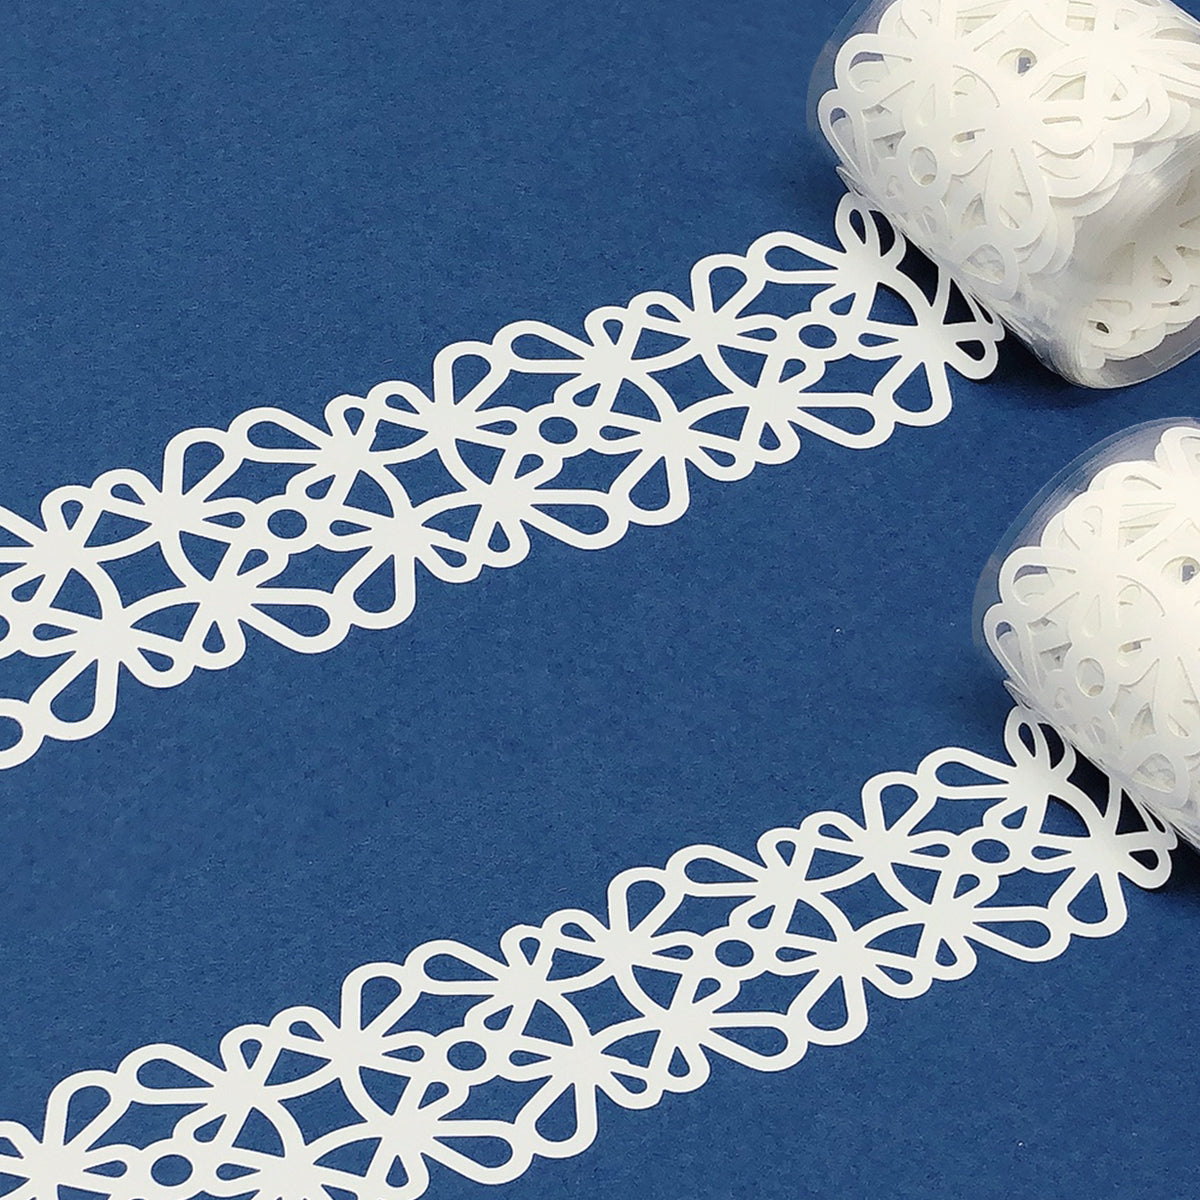 Wrapables Hollow Lace Pattern Washi Masking Tape 2M Length Total (Set of  2), White Geometric, 2 pieces - Baker's